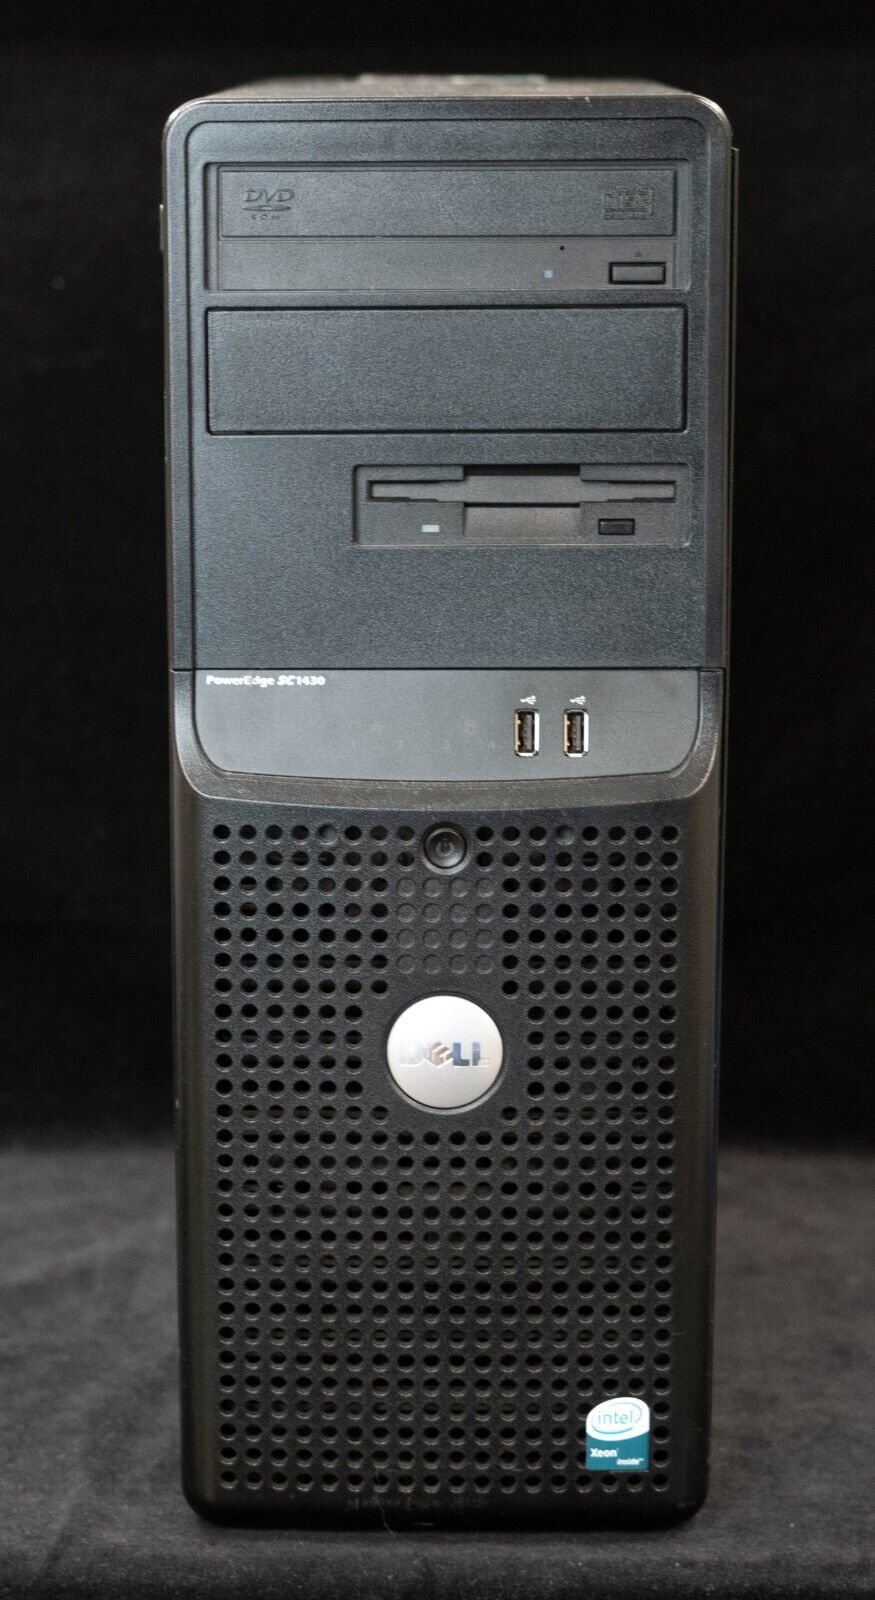 Dell Poweredge SC1430 Server Tower, Dual Core 5110, Xeon 1.6GHz 2GB RAM No HDD